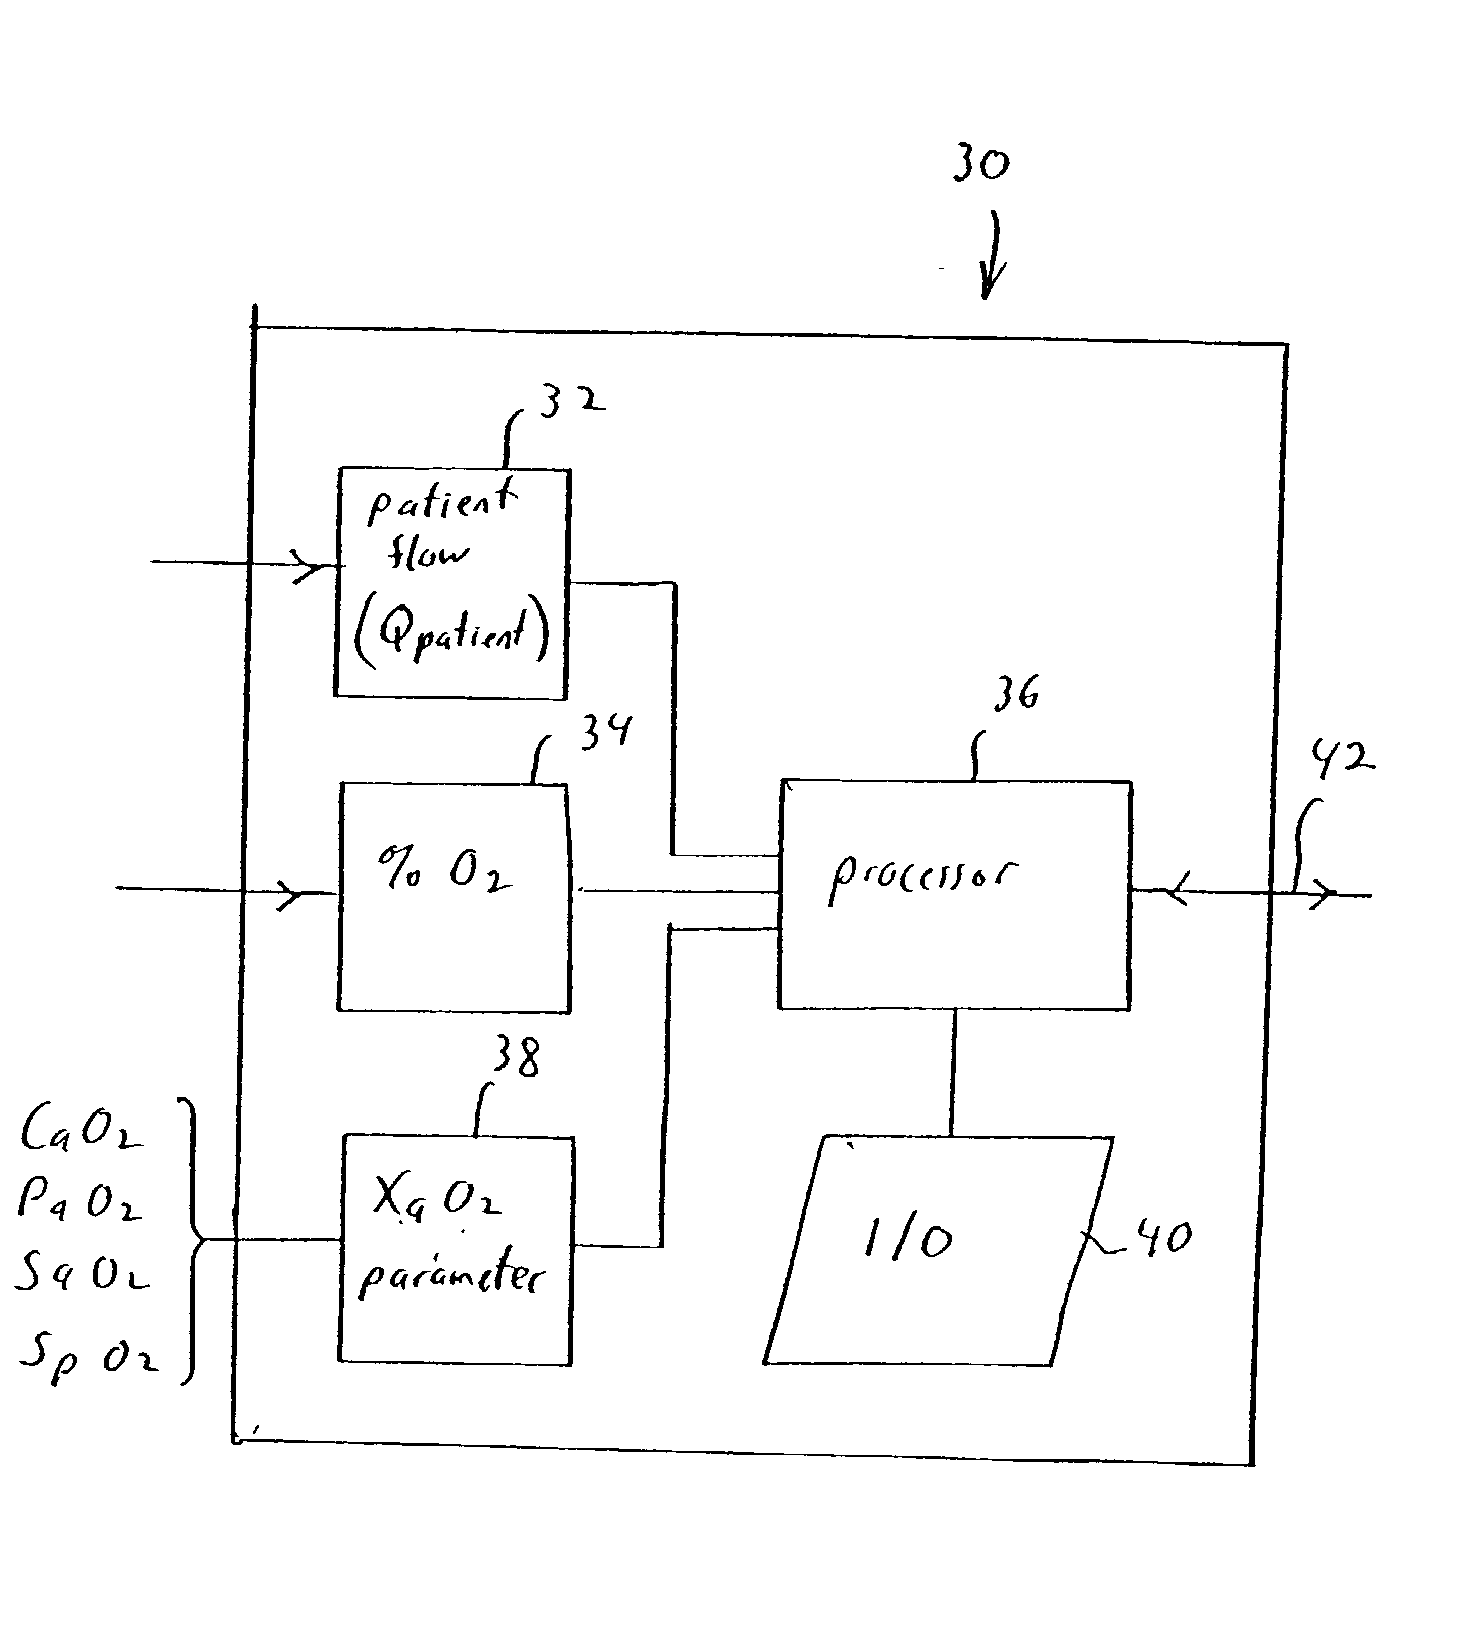 Method and apparatus for determining cardiac output